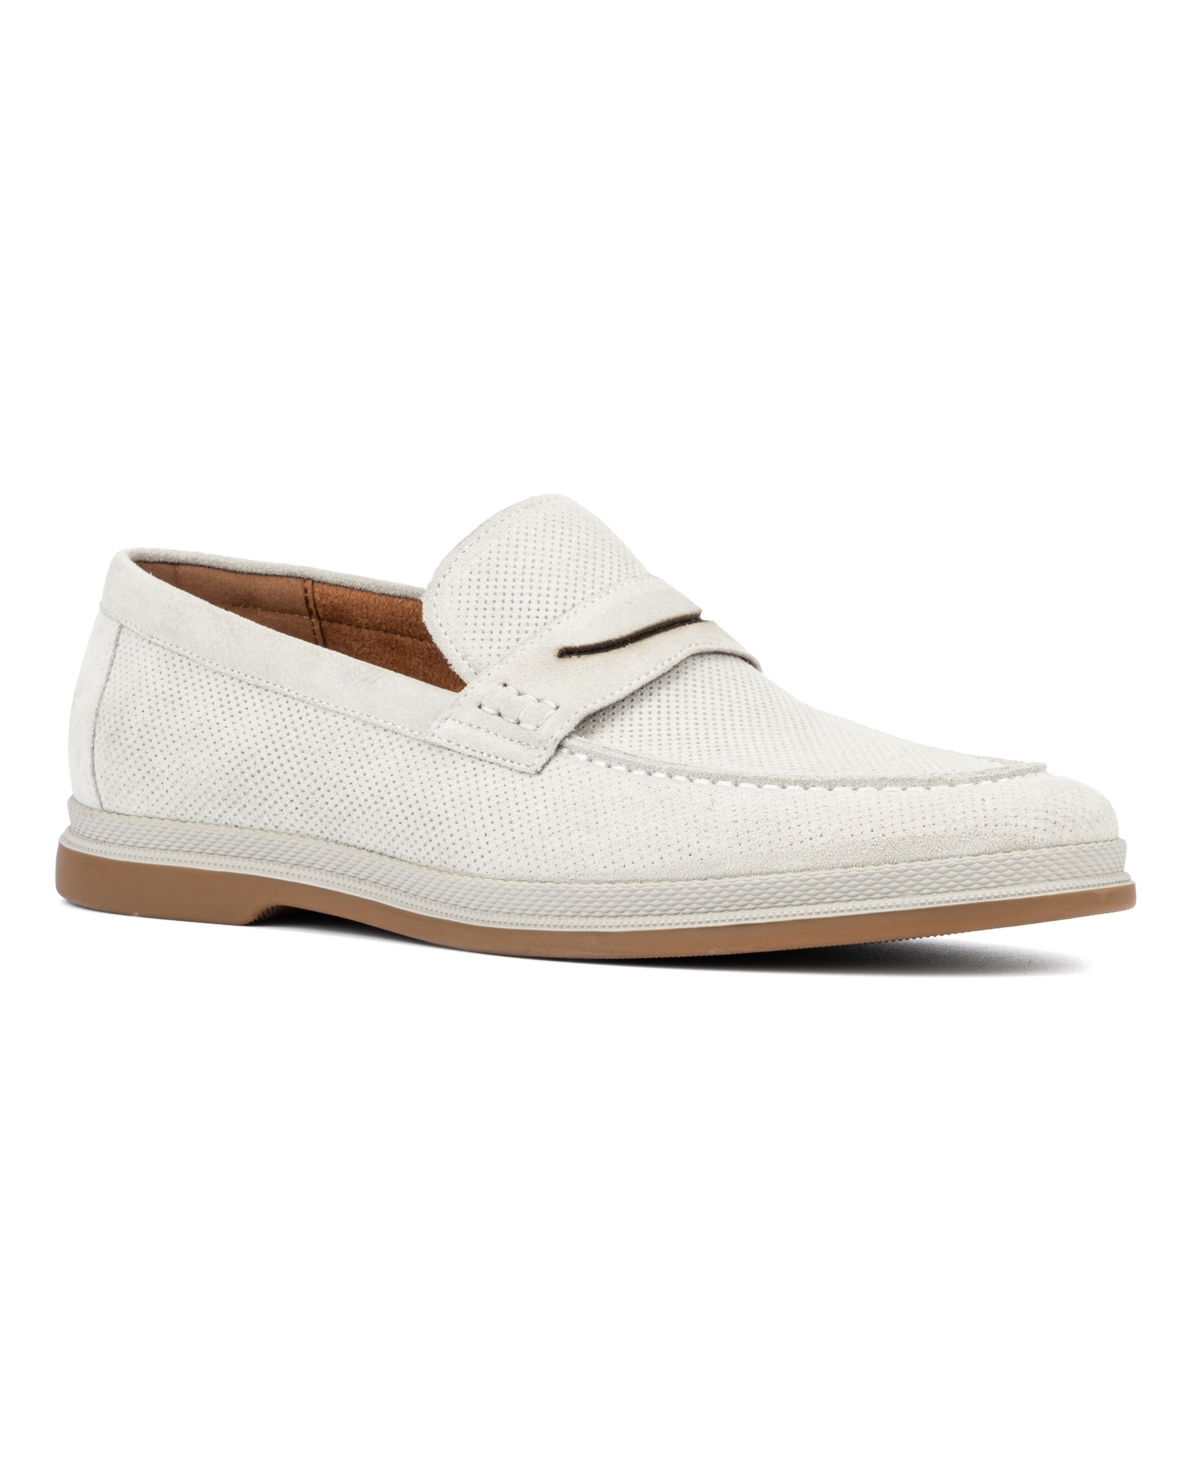 Vintage Foundry Co Menahan Loafer In White